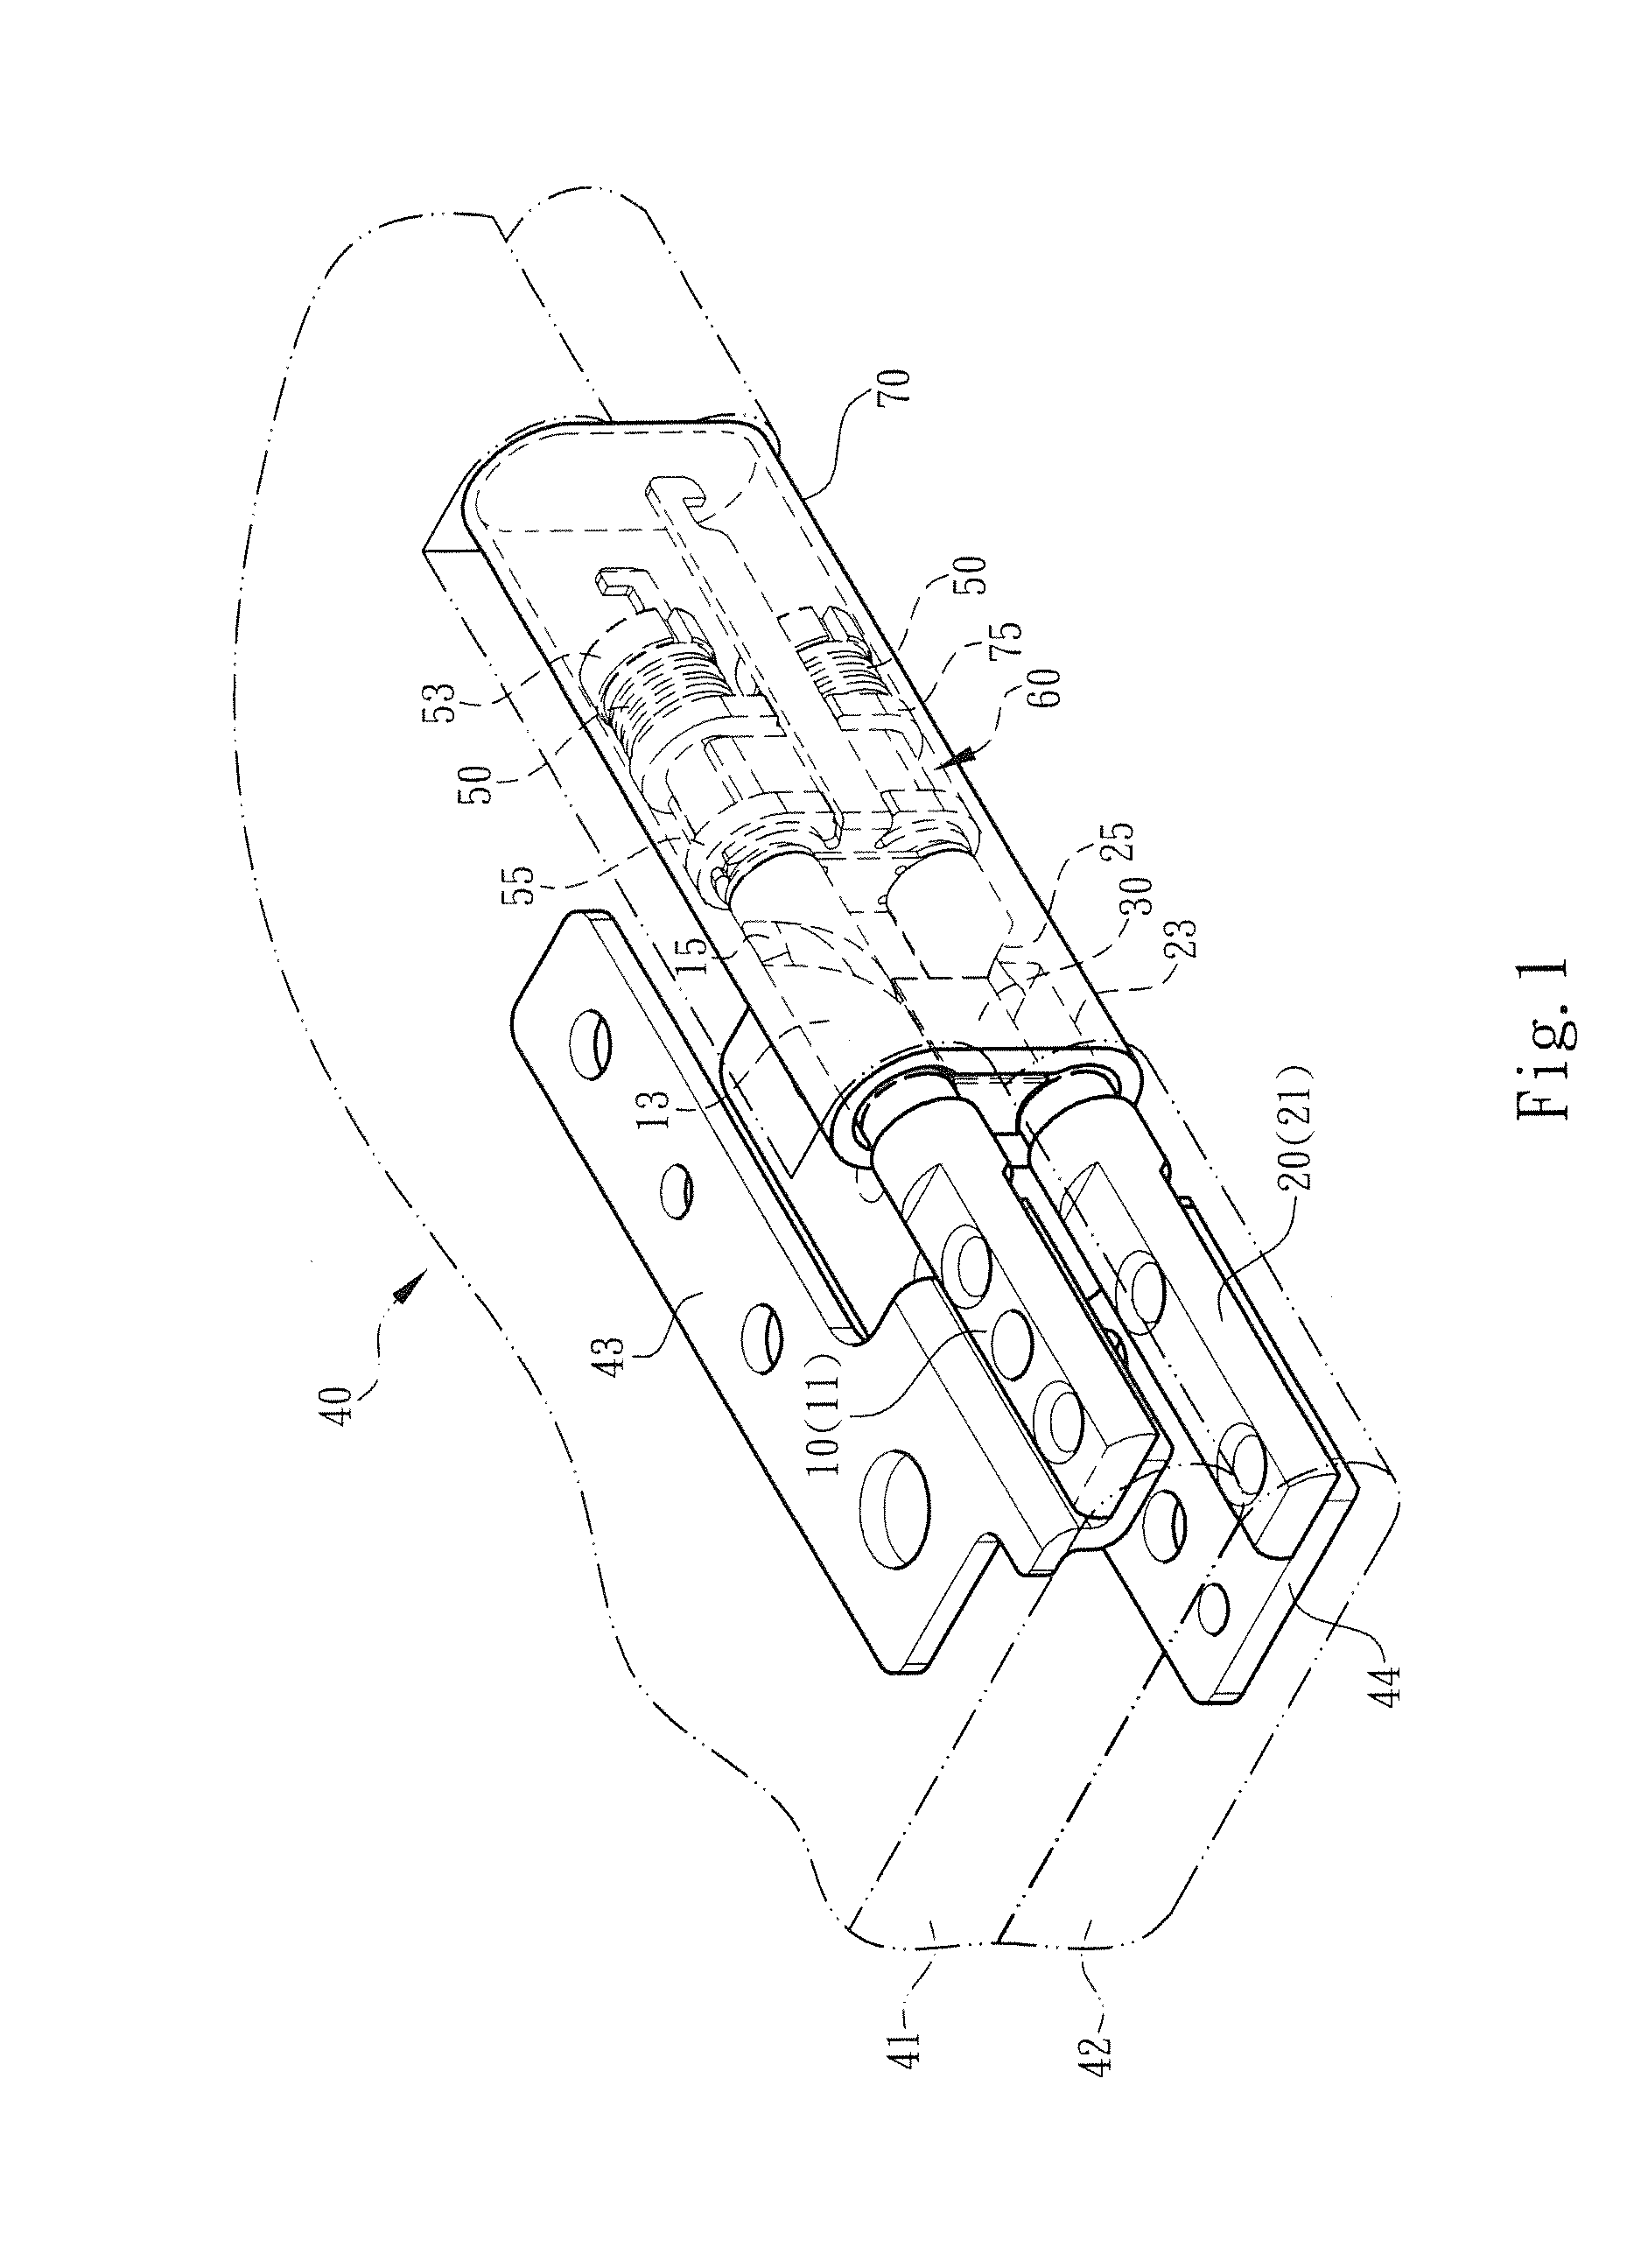 Torque balancing device applied to synchronous dual-shaft system